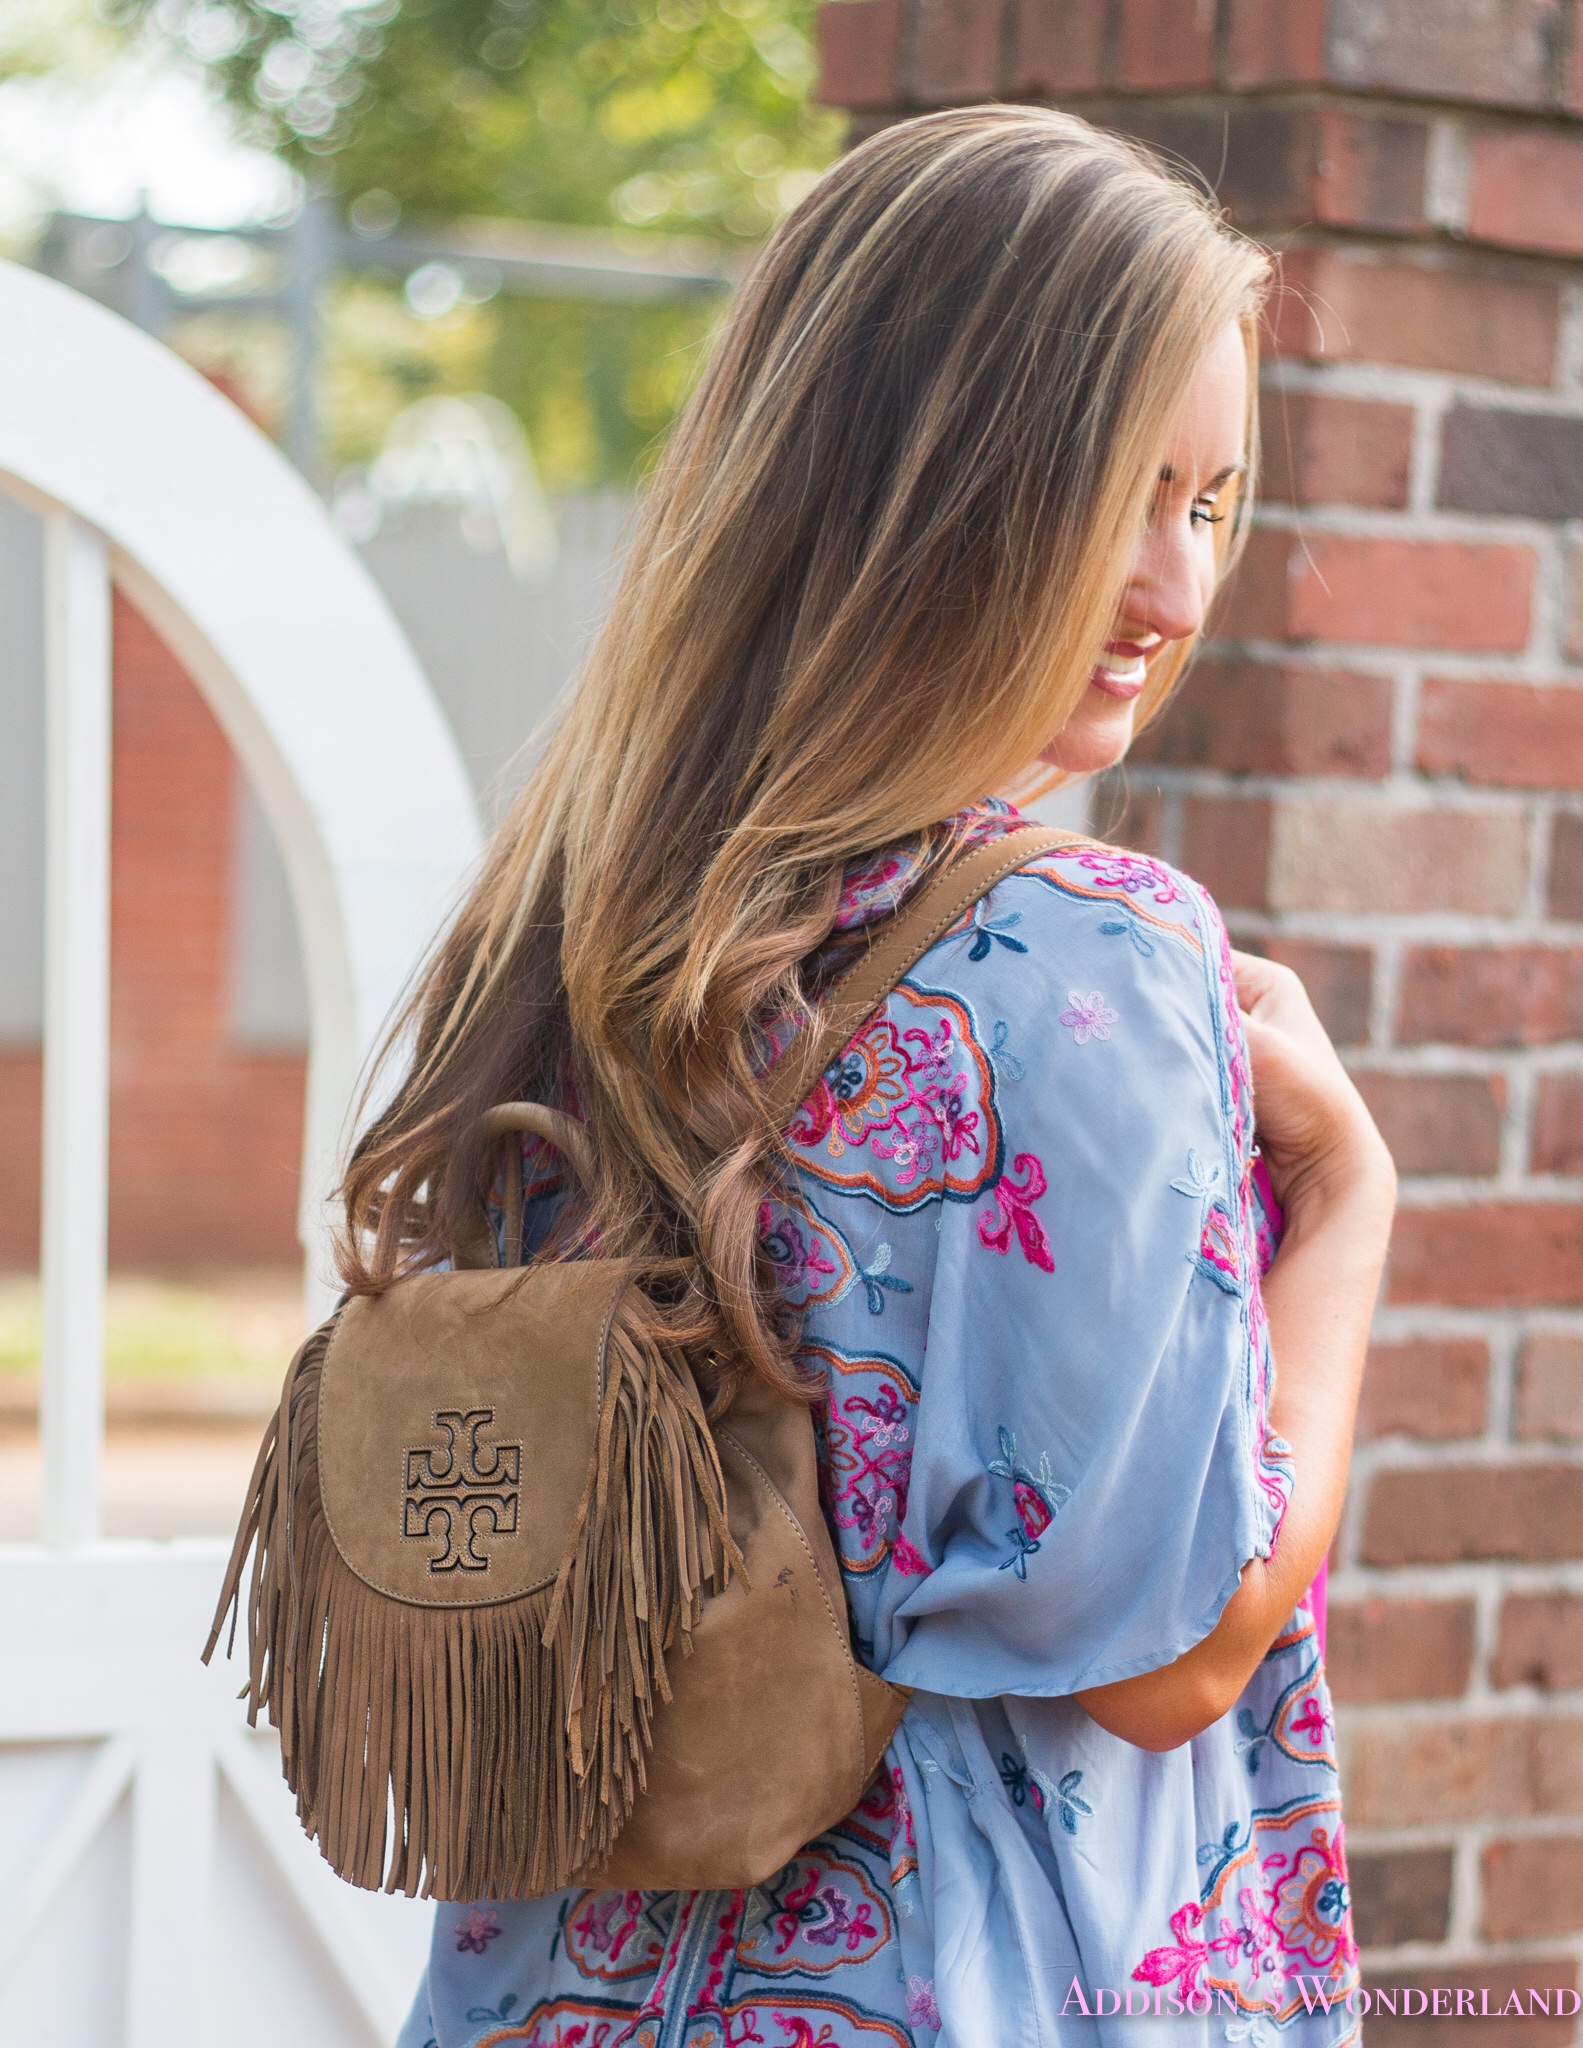 My New Favorite Handbag… A Backpack Purse with ! - Addison's